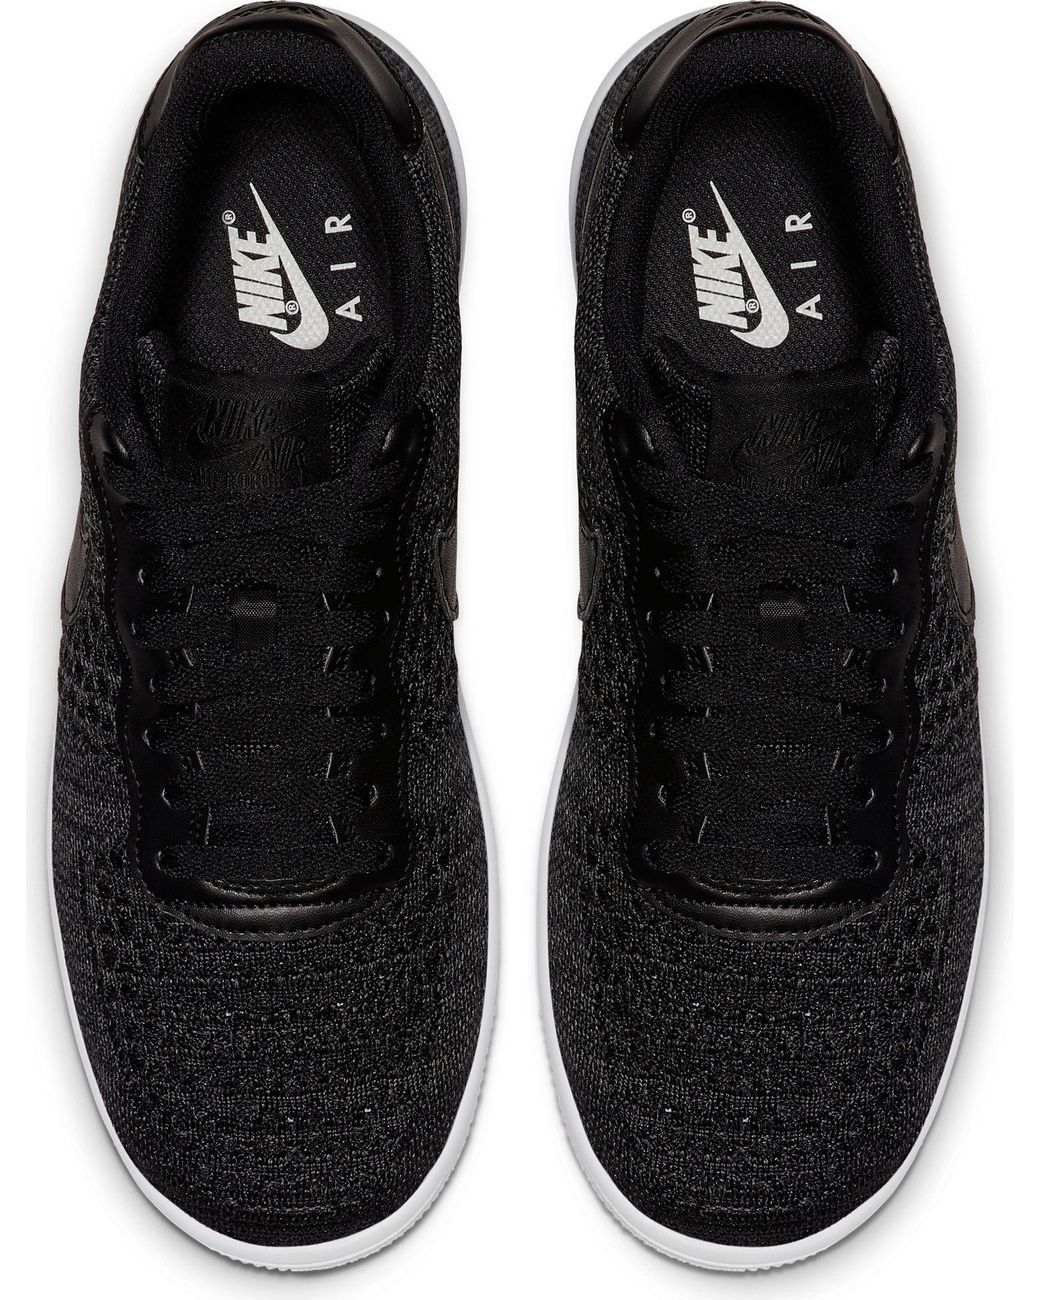 Nike Synthetic Air Force 1 Flyknit 2.0 in Black/Anthracite/White (Black)  for Men - Save 21% - Lyst